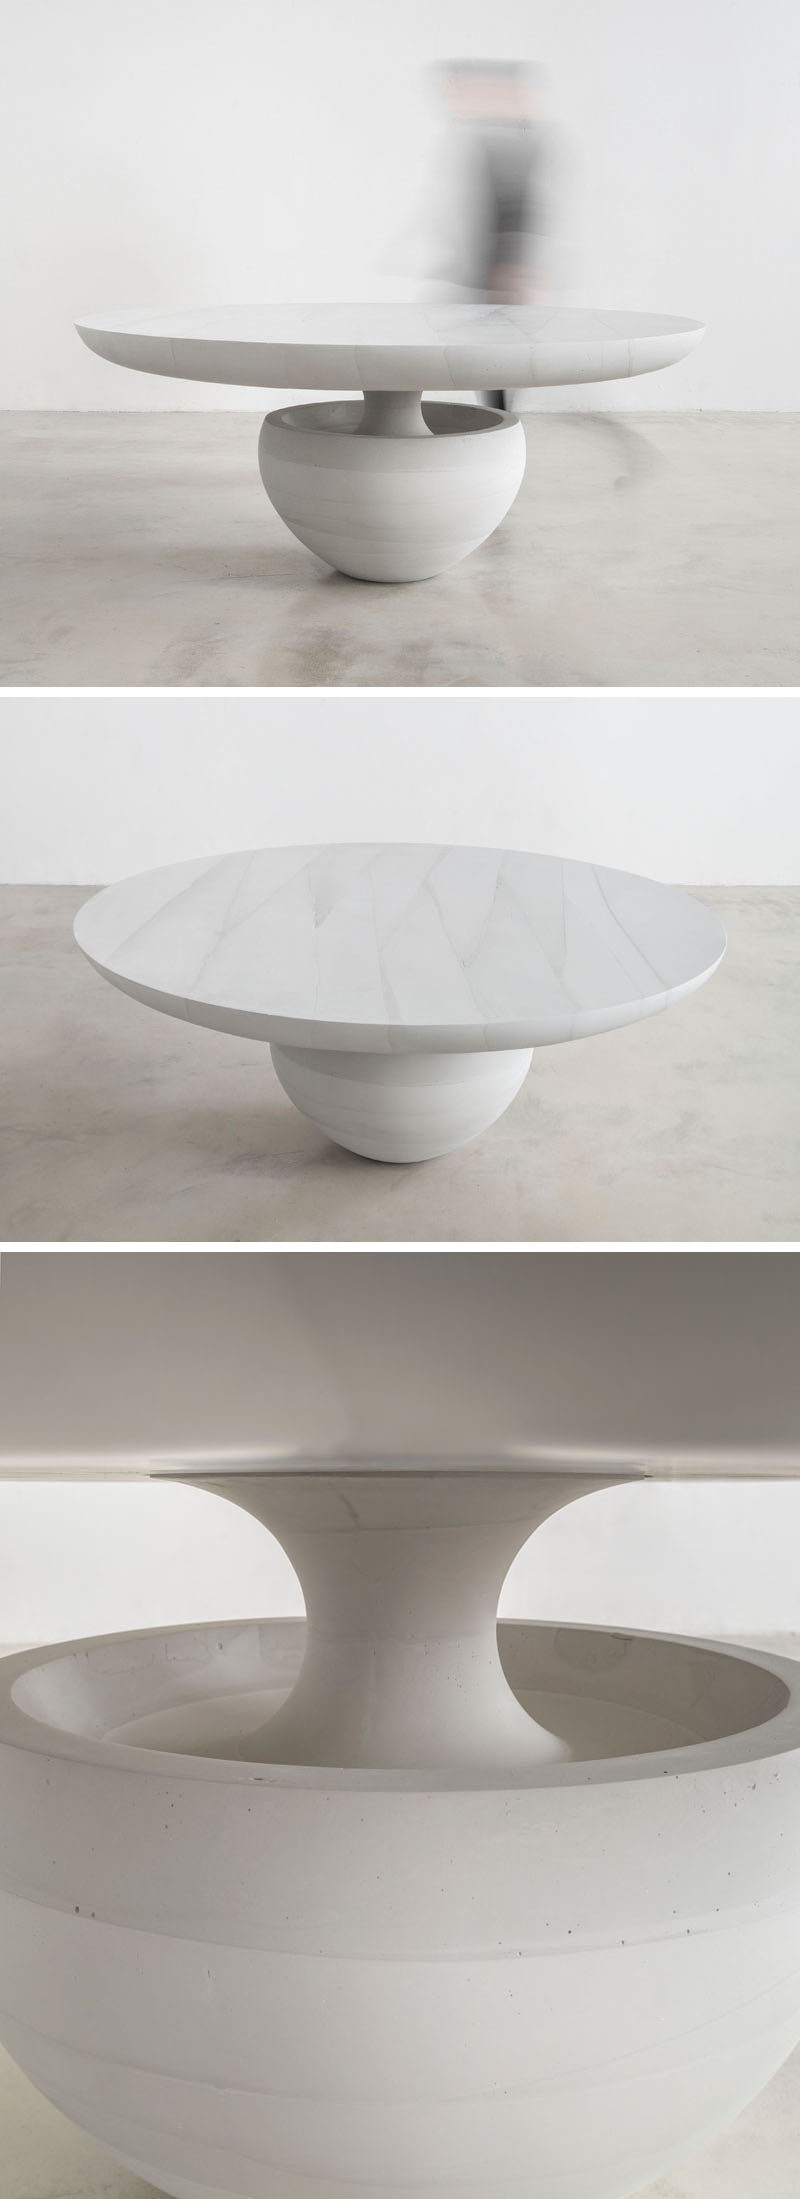 Designer Fernando Mastrangelo has created a carved concrete furniture collection named Ghost, that consists of dining table, coffee table and console.